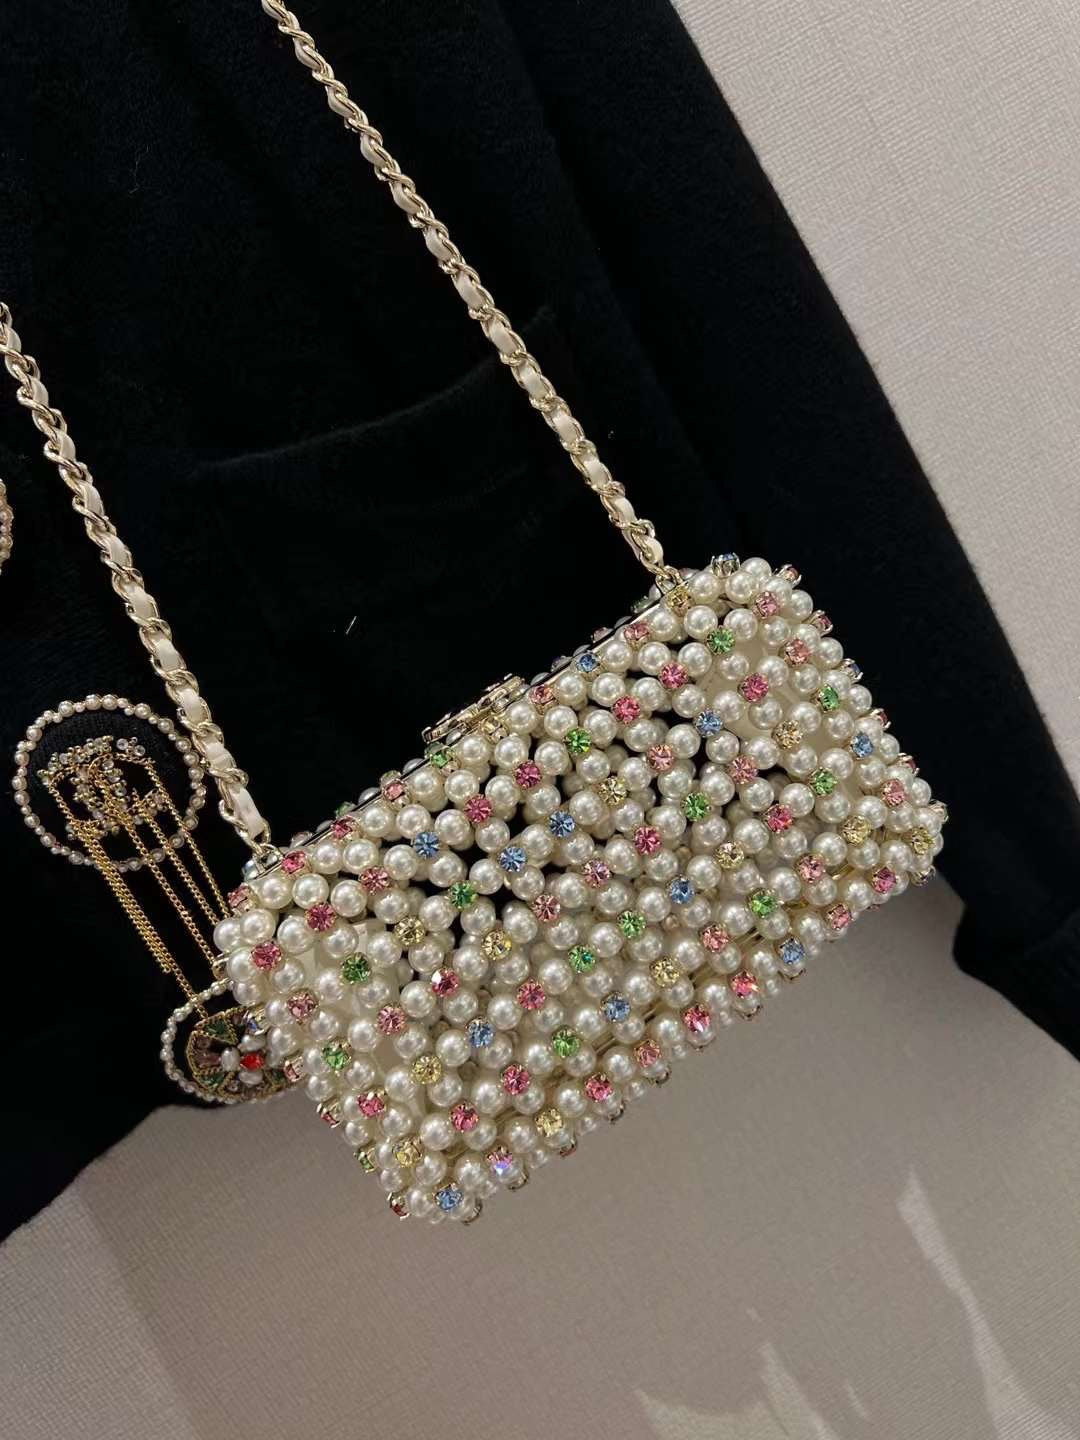 Chanel 23 Bag with studs and pearls